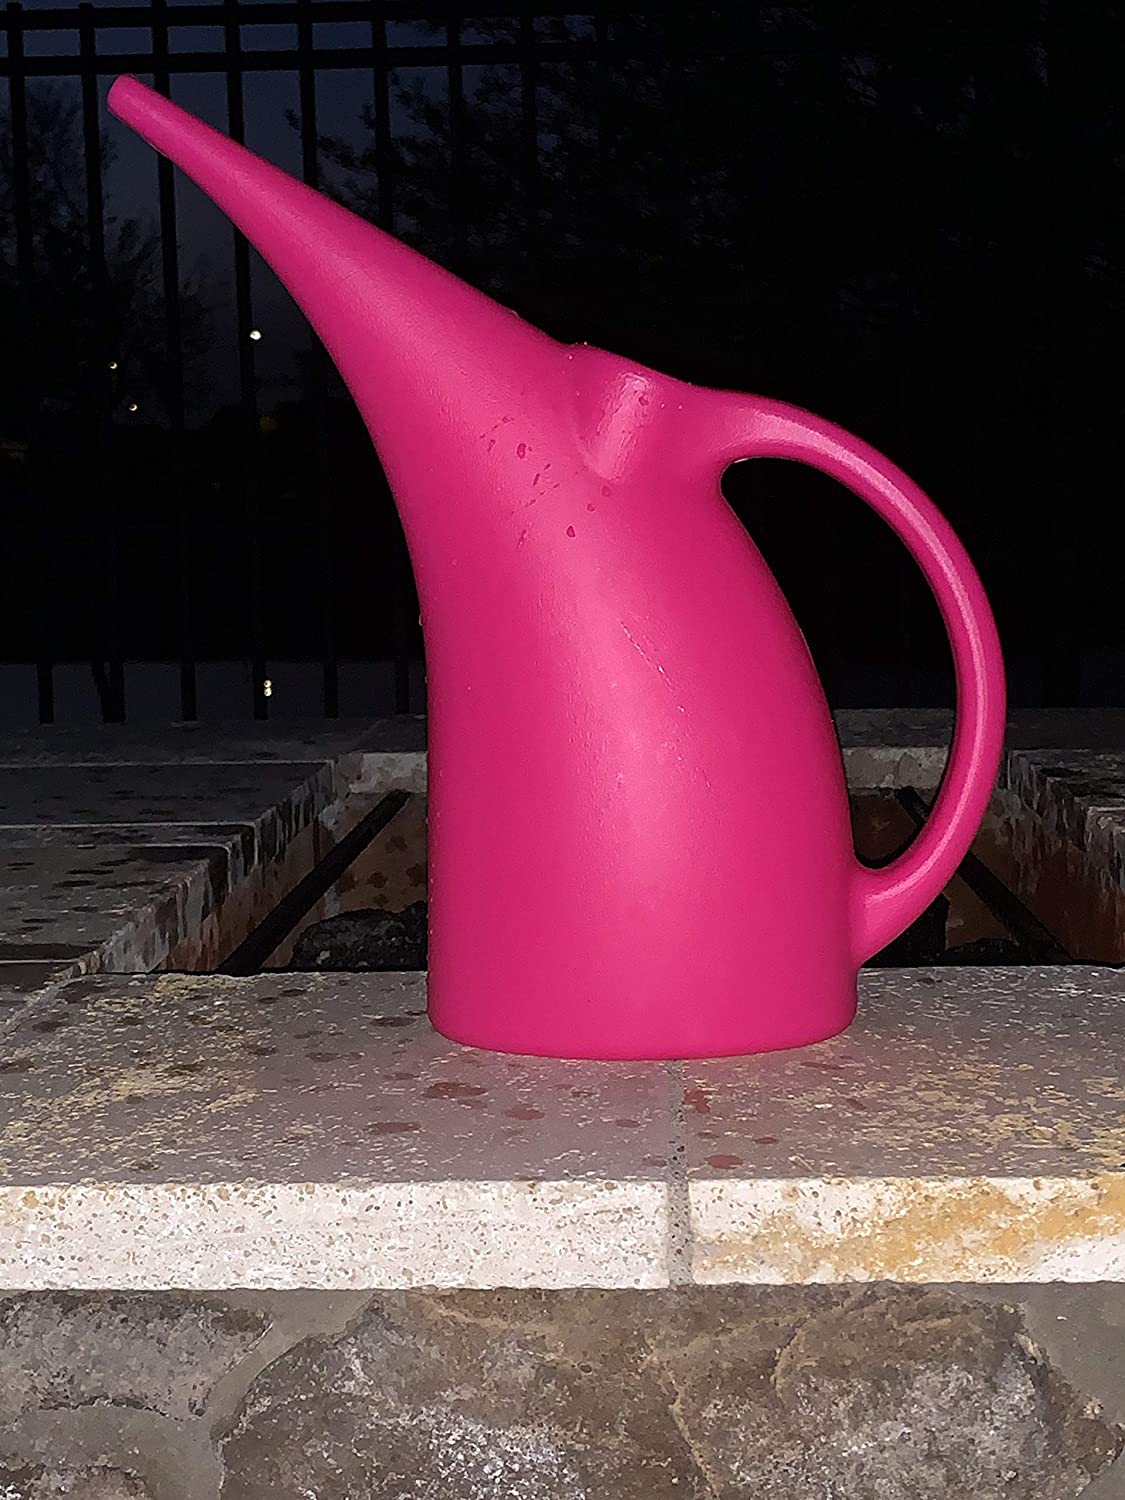 Kool Products Watering Can Indoor | Small Indoor Watering Cans for House Plants | Mini Plant Watering Cans | Plastic Watering Cans (1 Pack) 1/2 Gallon Plant Watering Can BPA Free (Pink) 0.00 freeshipping - Kool Products